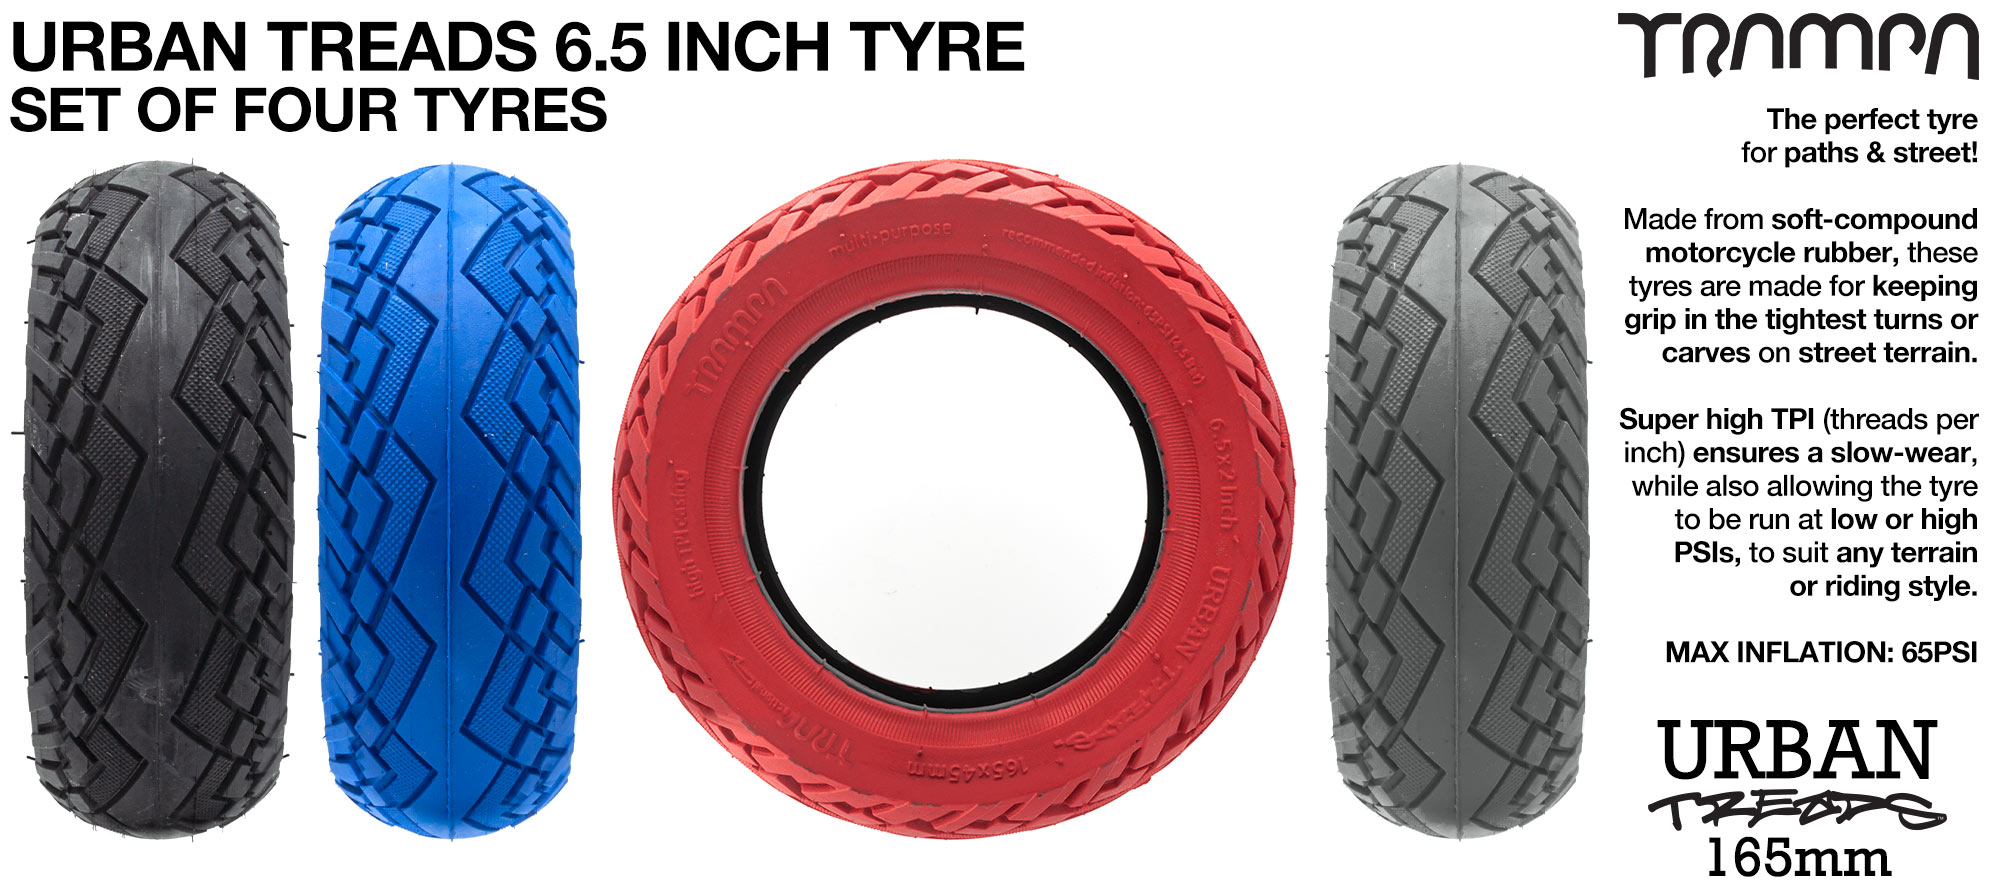 URBAN TREADS 6 Inch Tires measure 3.75x 1.75x 6.5 Inch or 165x 50mm with 3.75 inch Rim & fits all 3.75 inch Hubs - Set of 4 